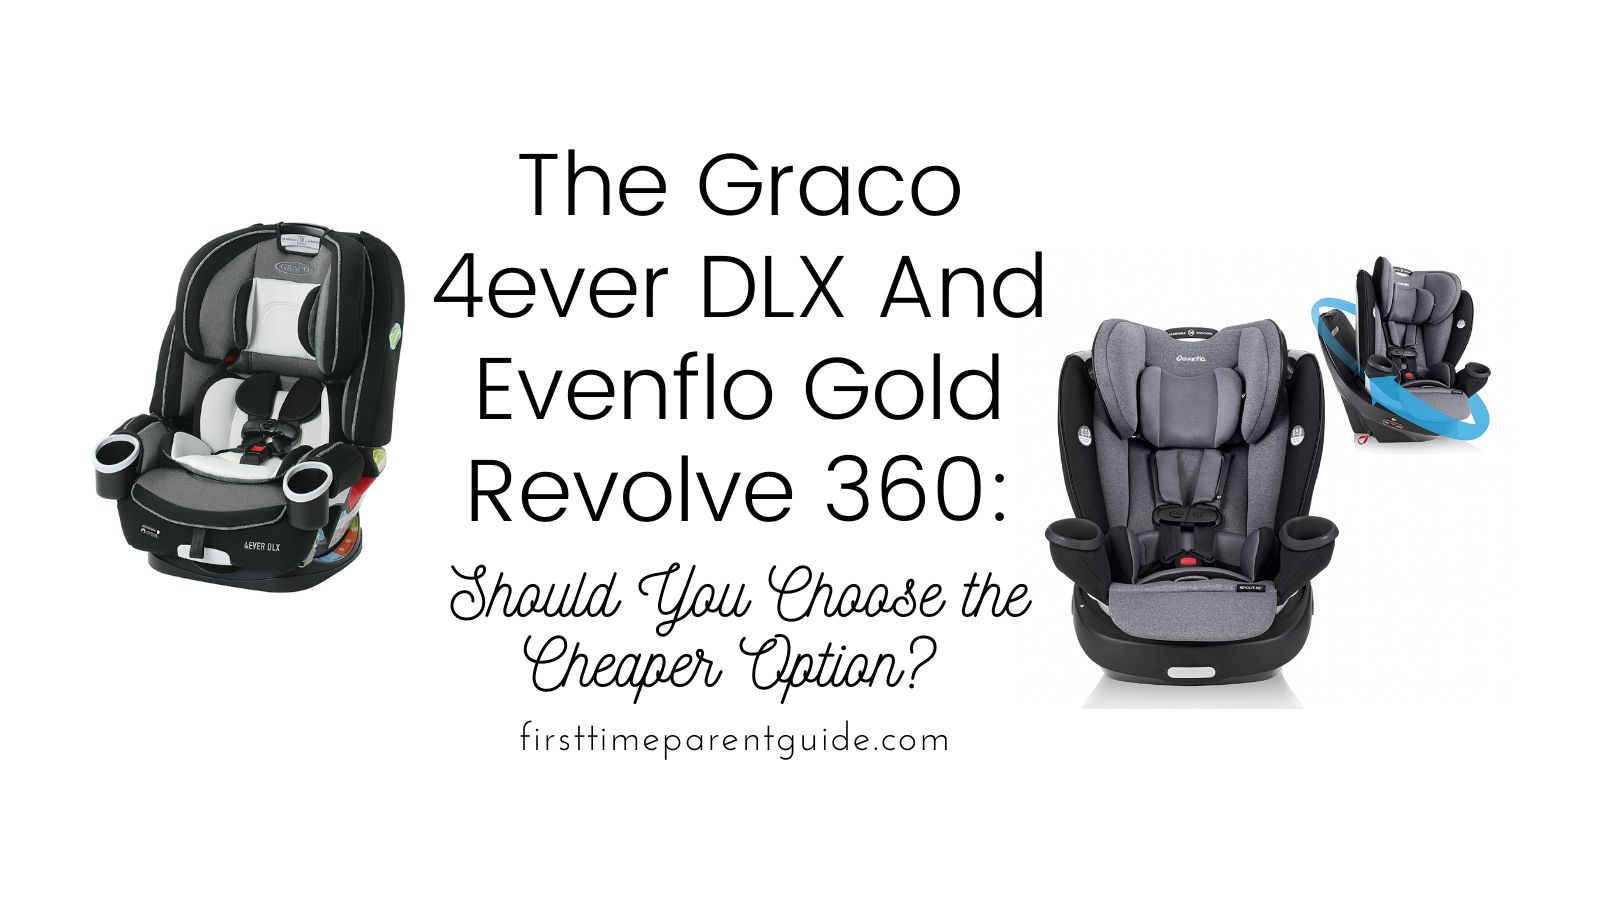 The Graco 4ever DLX And